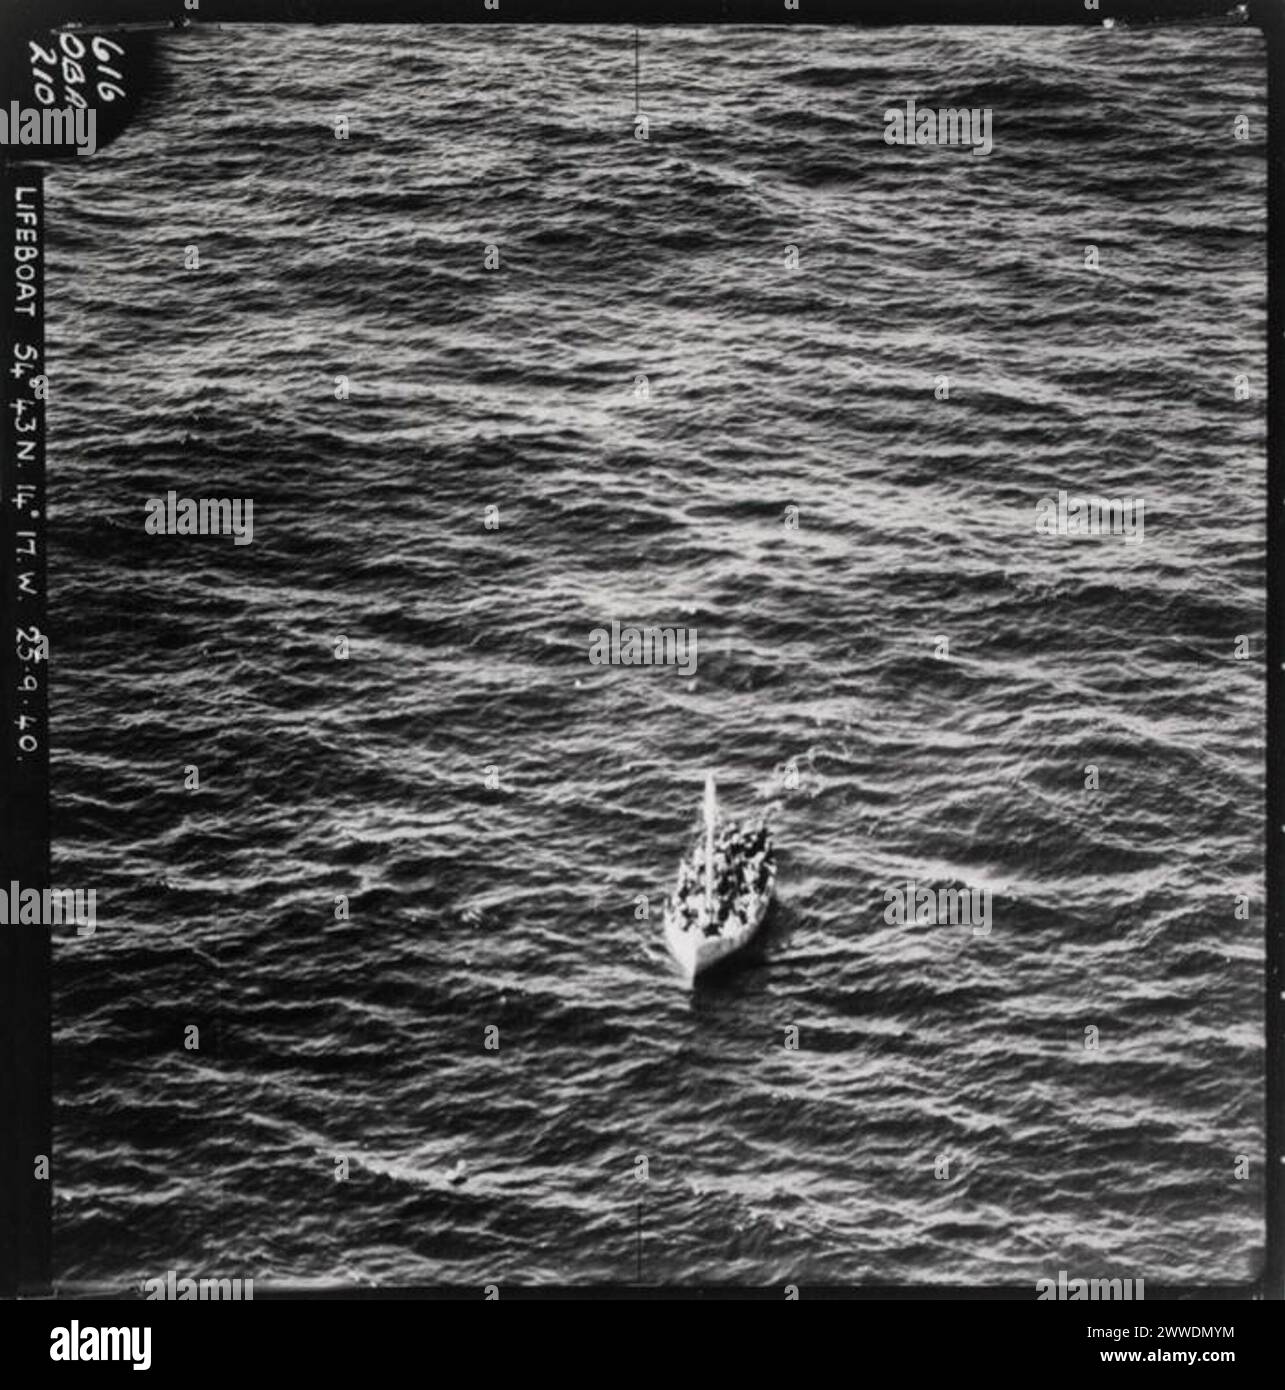 Awaiting Rescue Description: Aerial photograph of lifeboat from the SS City of Benares. The passenger liner was carrying children being evacuated from Britain to Canada when it was sunk in a U-Boat attack on the convoy in which it was travelling. Only 13 of the 90 children on board survived and government evacuation of children to the Dominions such as Canada, New Zealand and Australia (the CORB scheme) immediately ceased. Date: 25th September 1940 sea, rescue, ship, evacuation, atlantic, lifeboat, corb, airministry, ellermanlines, u48, ssmarina, sscityofbenares, cityofbenares, childrensoverse Stock Photo